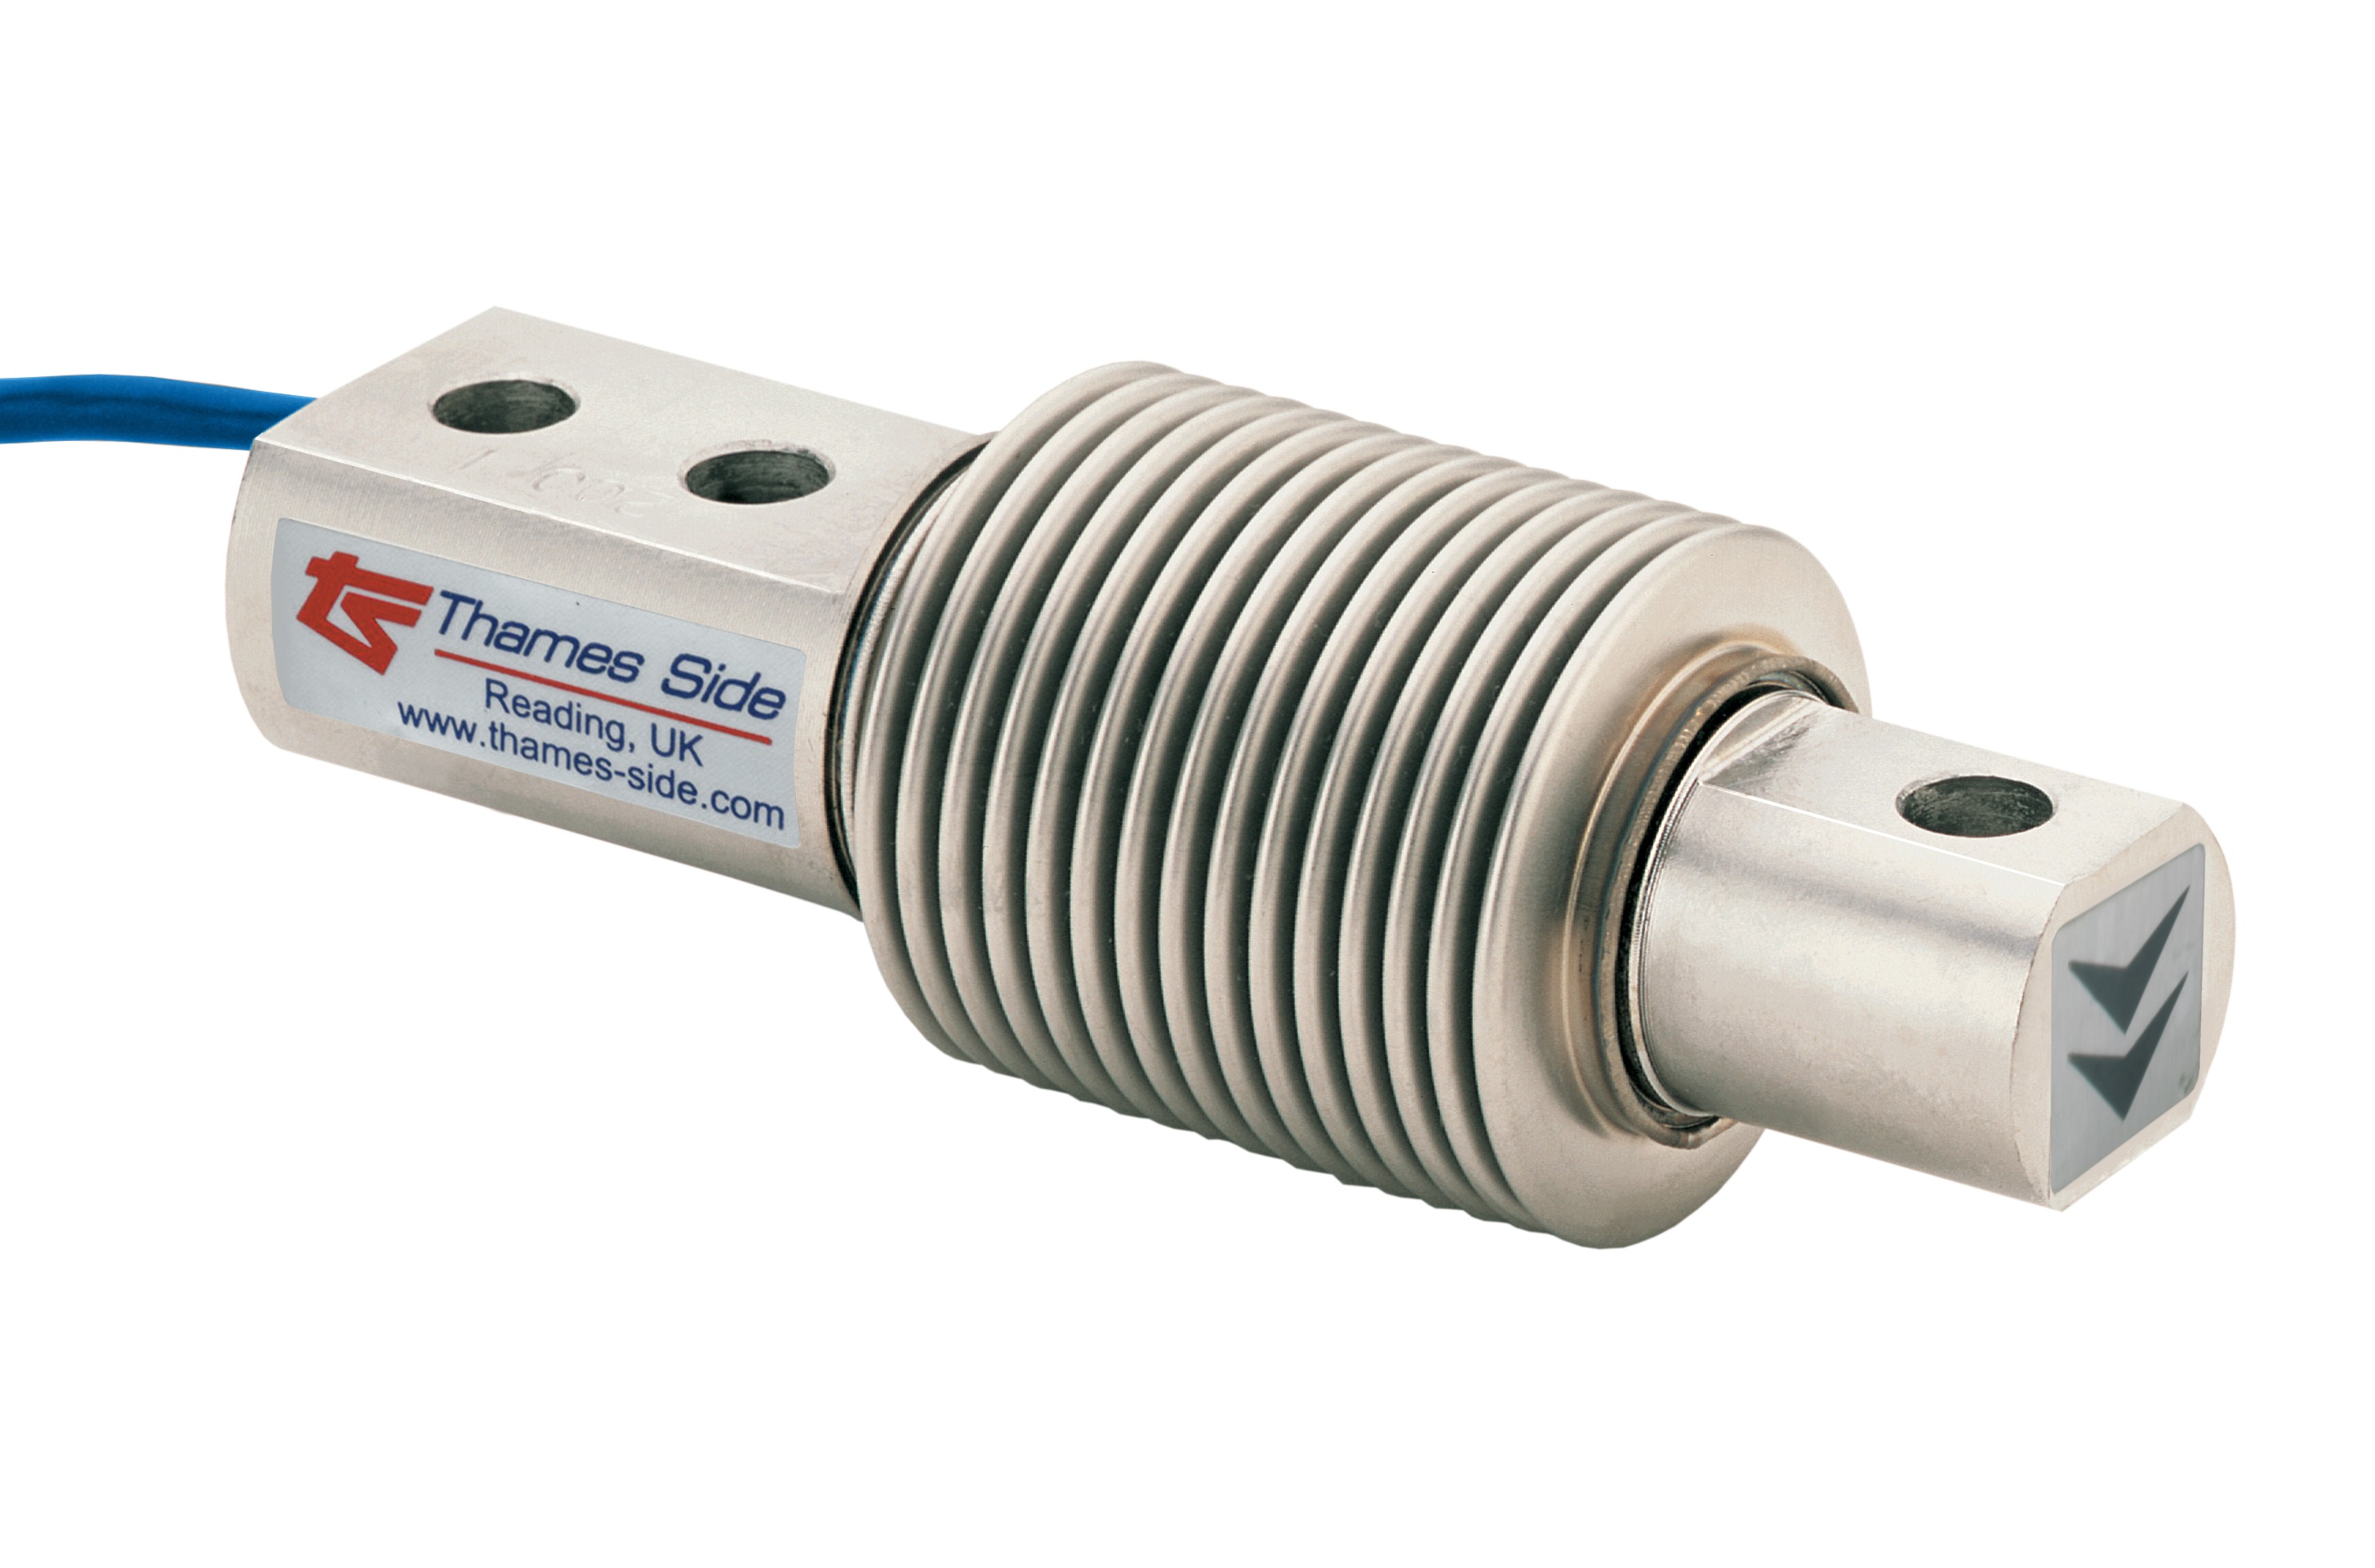 T12A single point load cell